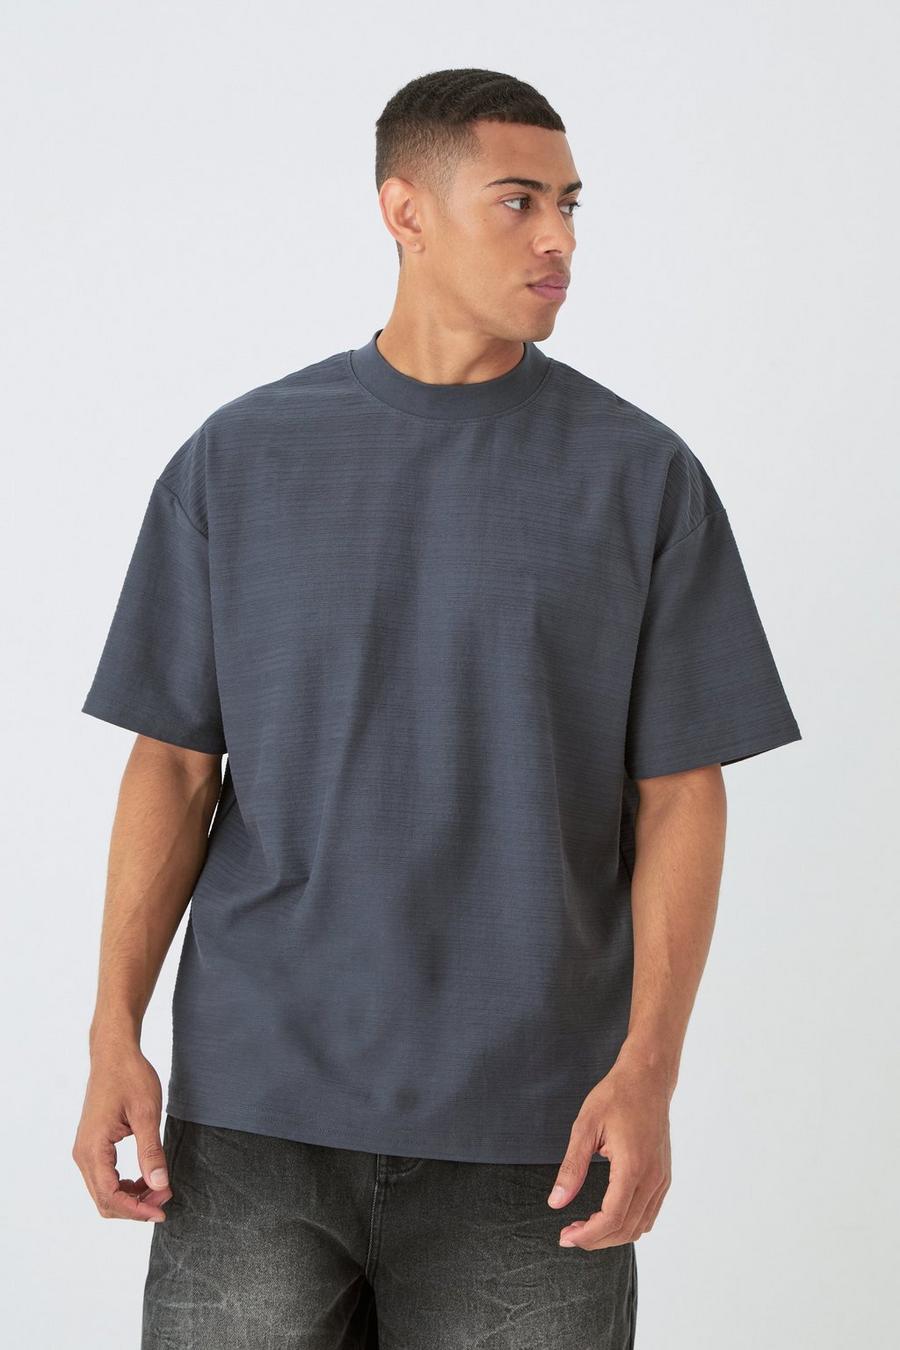 Oversized Jacquard Raised Striped Extended Neck T-shirt, Charcoal